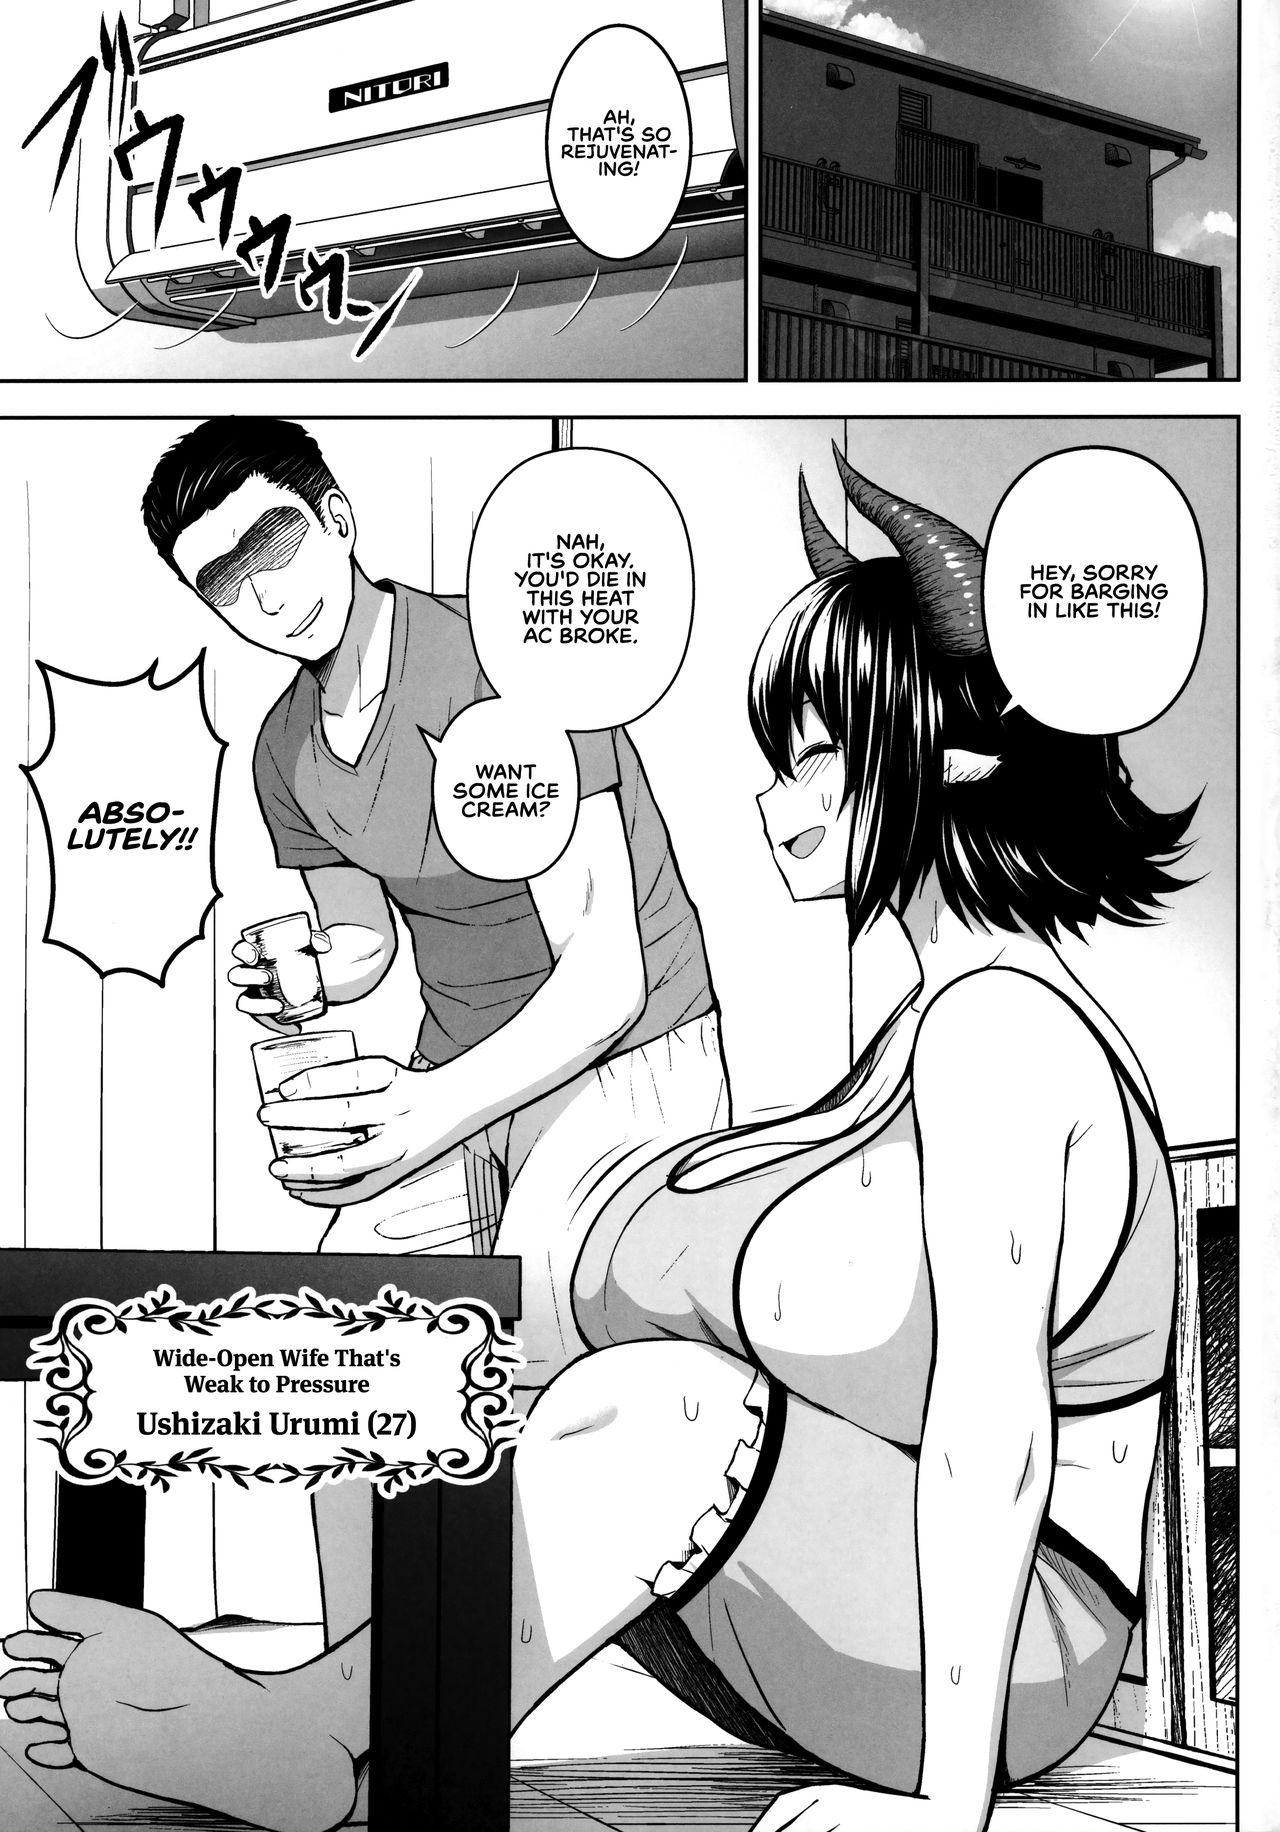 Perverted Oku-san no Oppai ga Dekasugiru noga Warui! | It's Your Fault for Having Such Big Boobs, Miss! - Touhou project Cop - Page 3